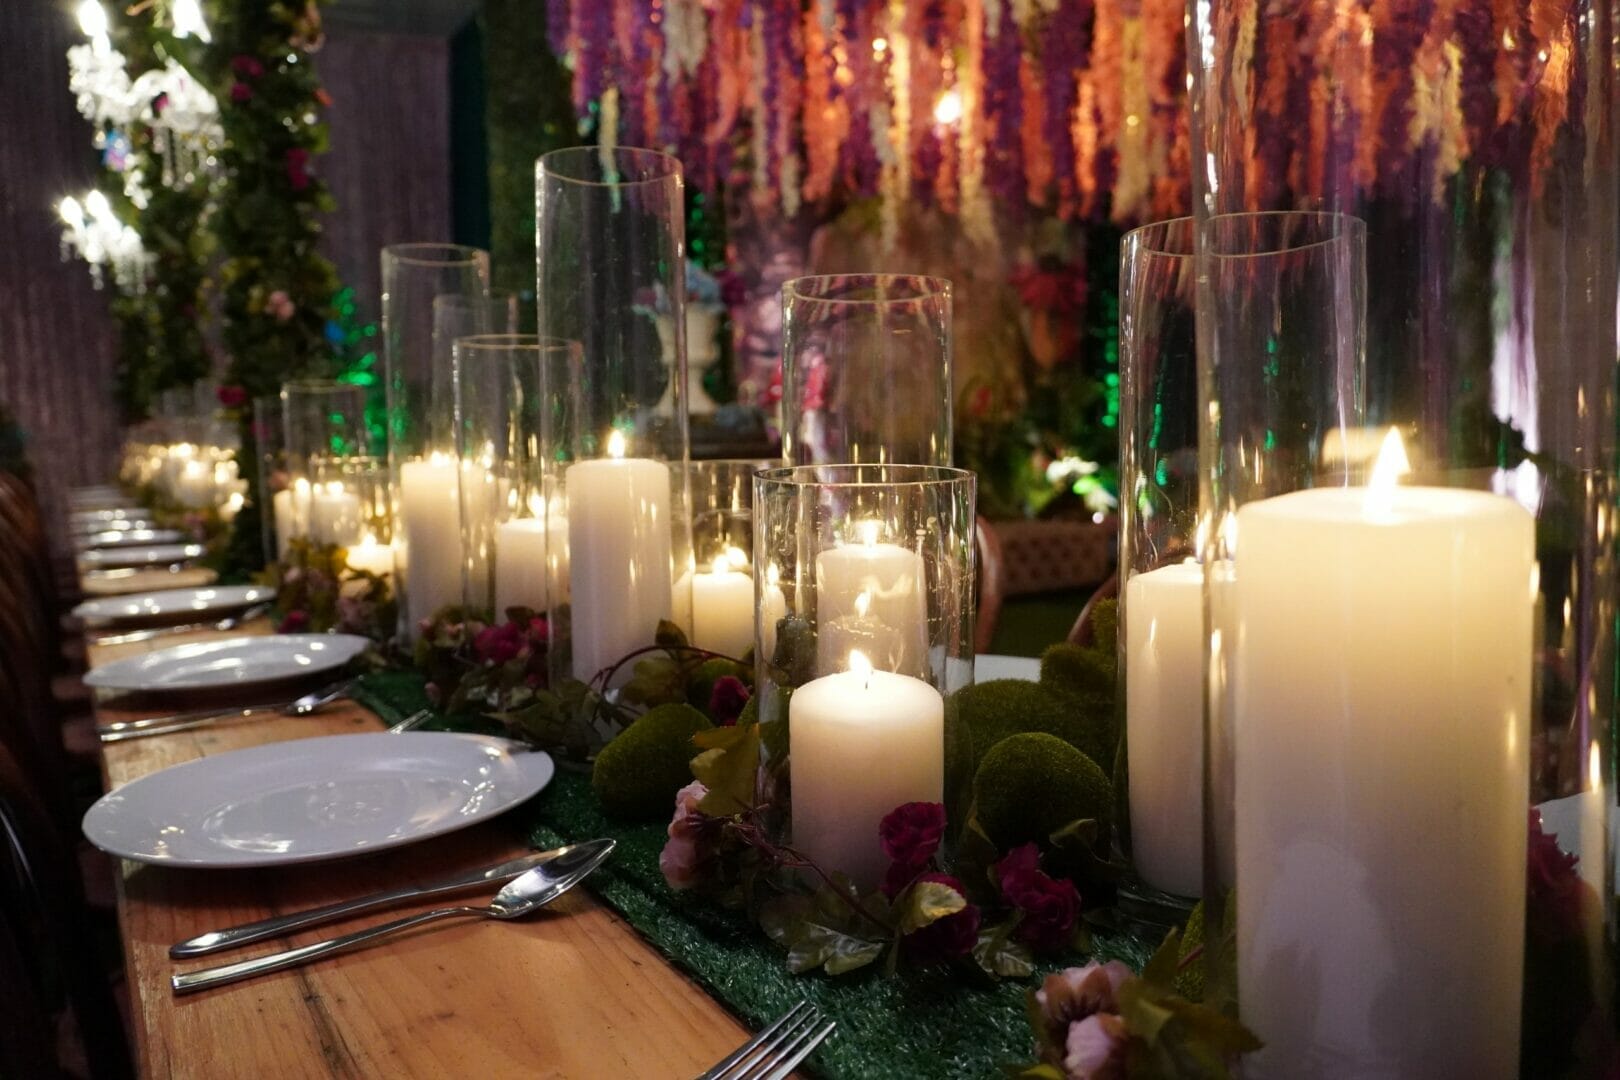 Glass vases and candles in enchanted garden themed setup